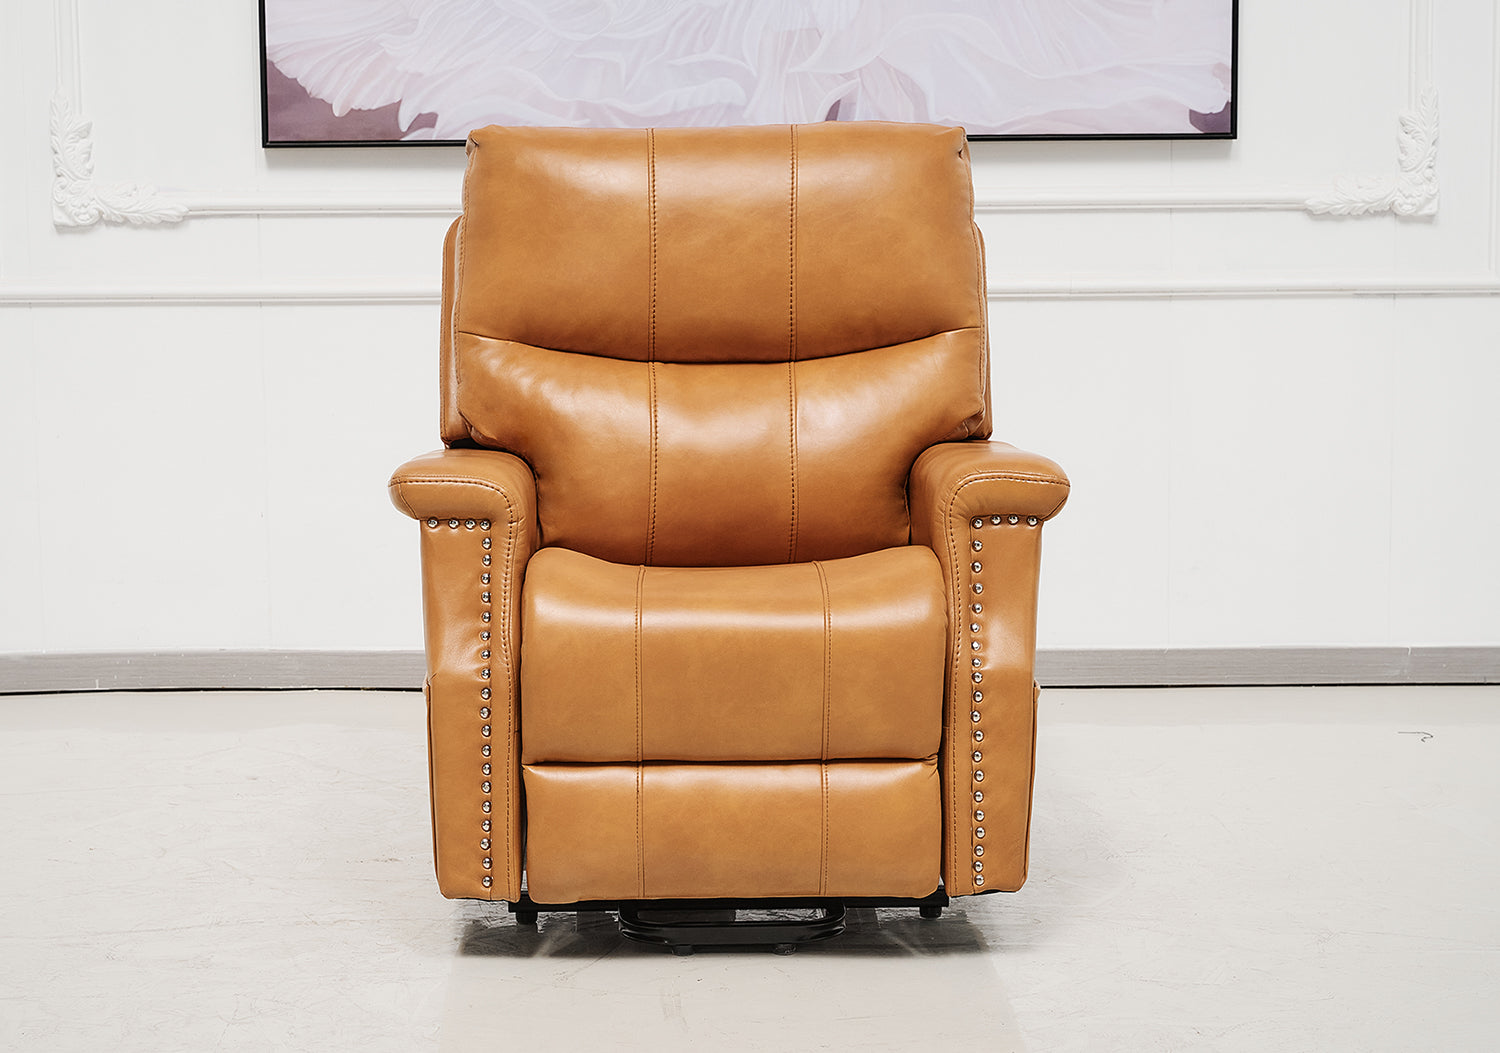 BT ComfortRise PU Leather Upholstered Lift Chair